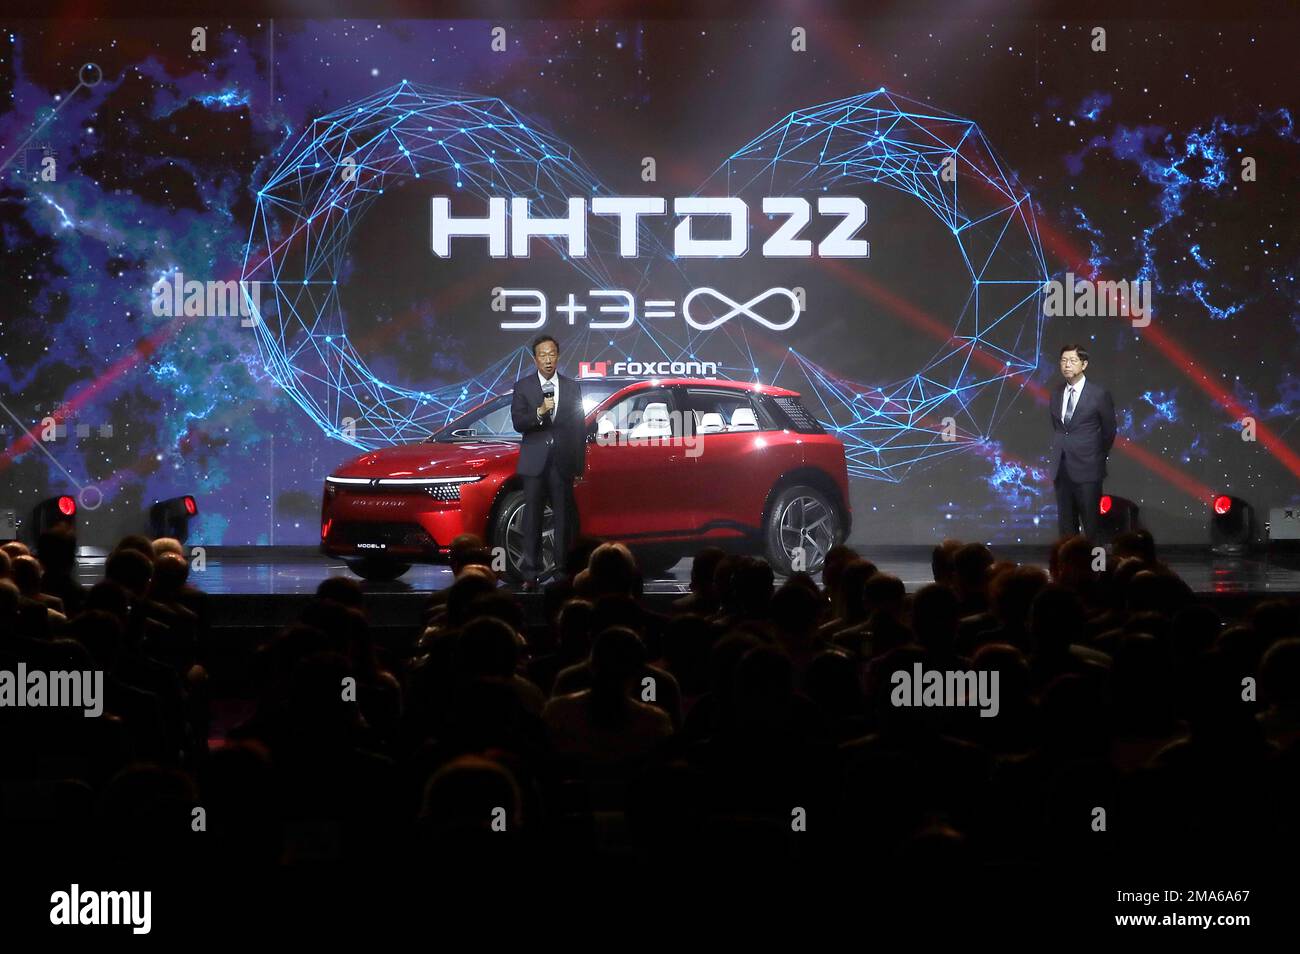 Foxconn founder Terry Gou, left, delivers a speech in front of the Model B electric car during the 2022 Hon Hai Tech Day (HHTD 22) at the Nangang Exhibition Center in Taipei, Taiwan, Tuesday, Oct. 18, 2022. (AP Photo/Chiang Ying-ying) Stockfoto